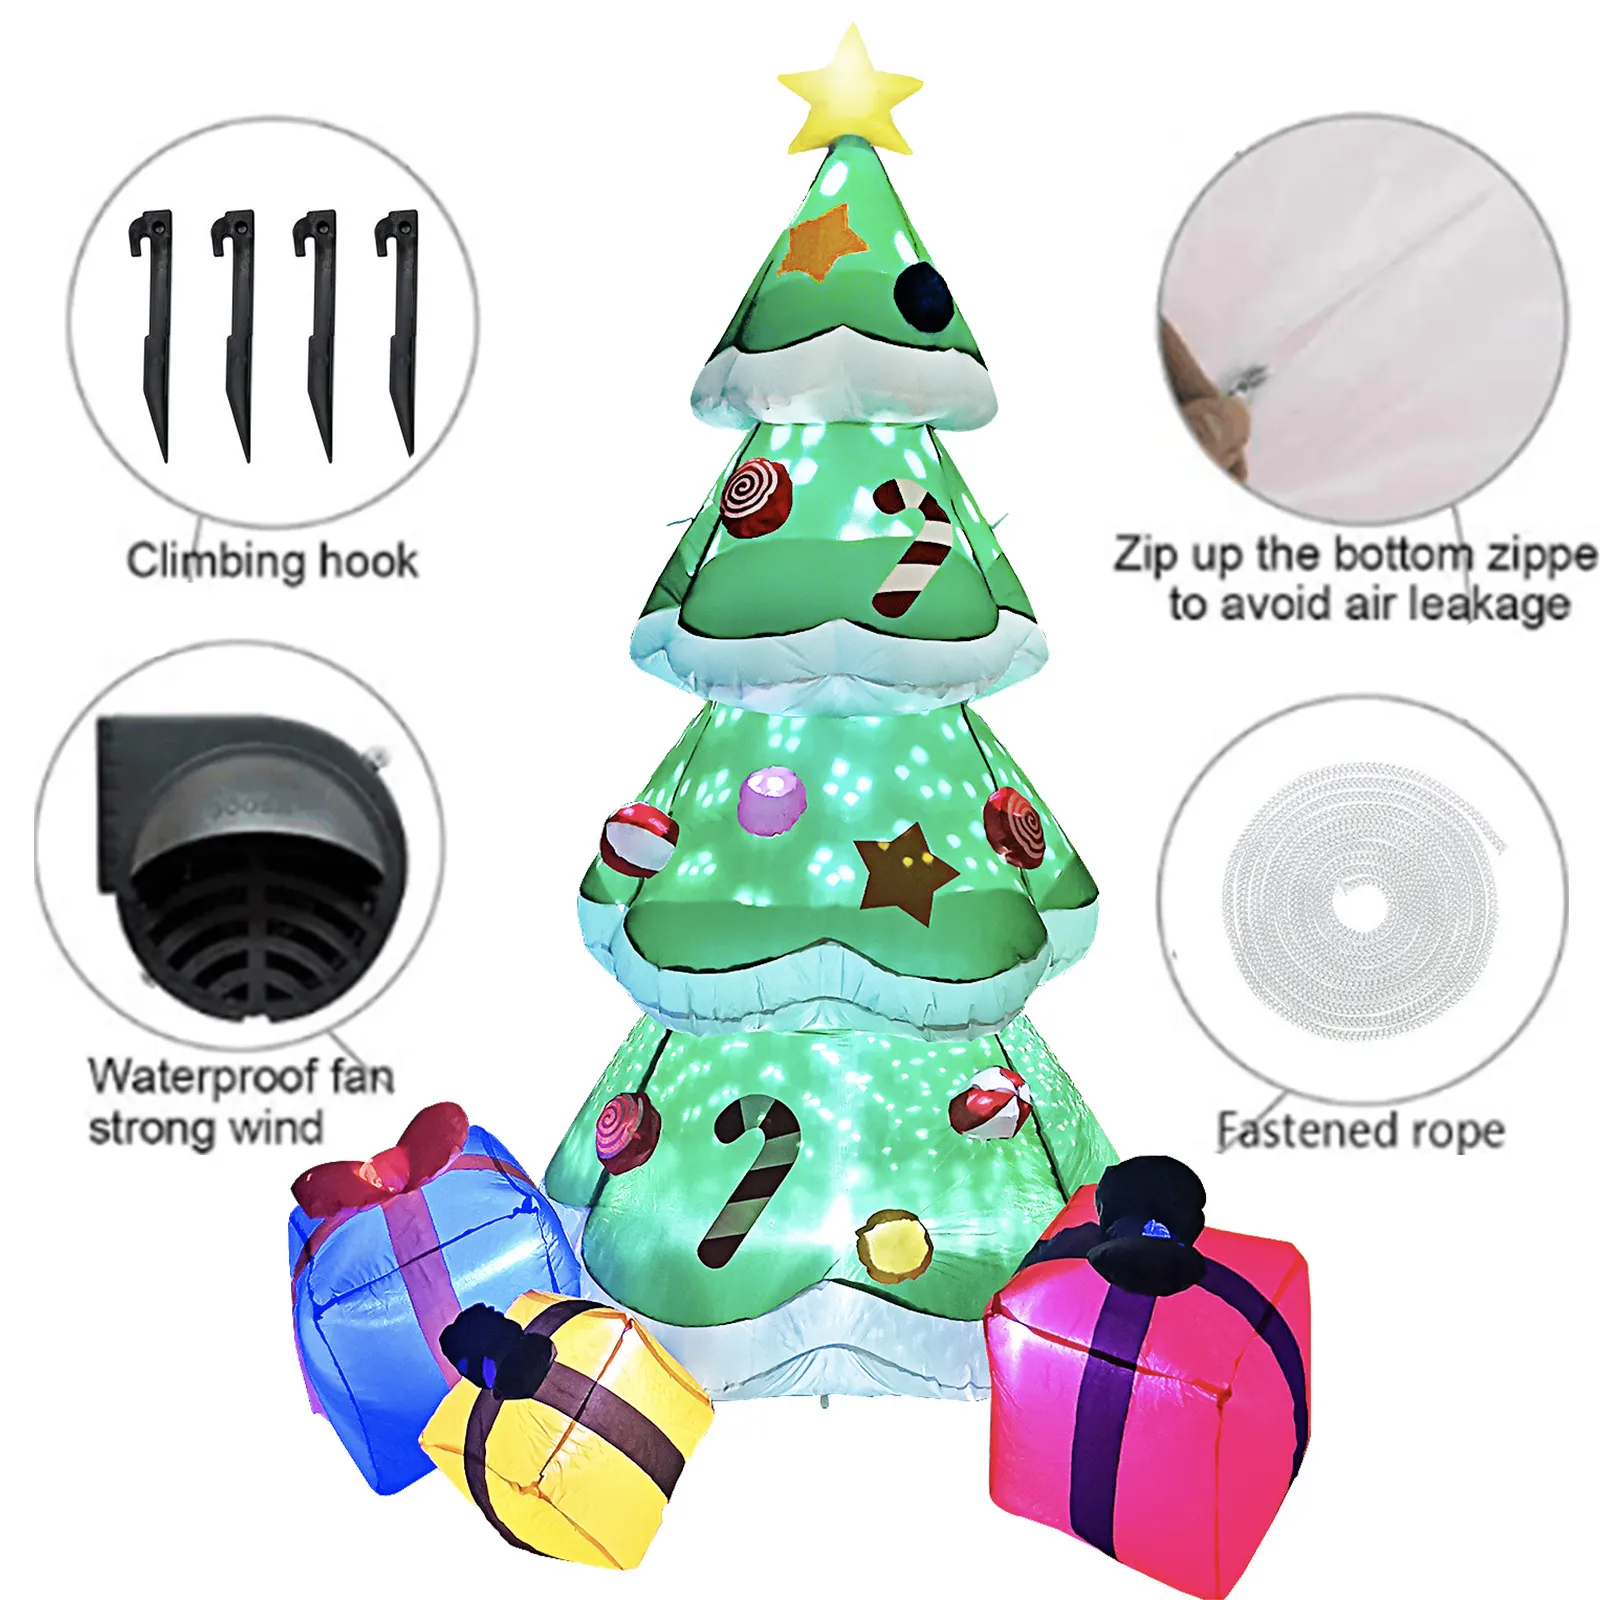 2 1m Christmas tree garden outdoor decoration RGB lighting inflatable Xmas trees inflatables model festival light props candy cane276C